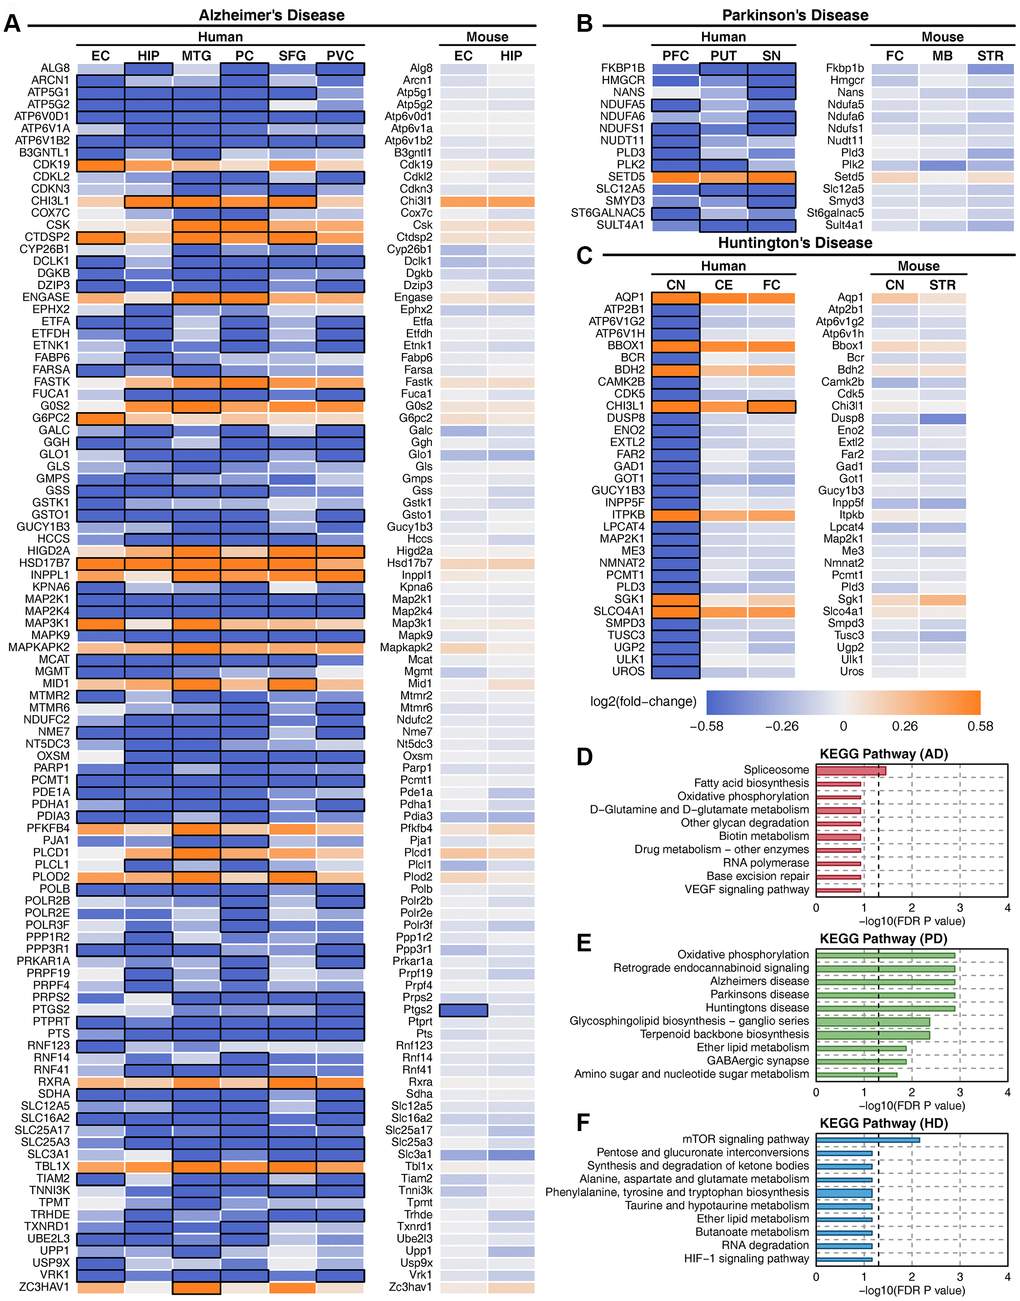 Deregulated metabolic genes with consistent expression between human patients and mouse models. (A) Heatmap of consistently expressed deregulated genes in AD human samples and the APP transgenic mouse model. (B) Heatmap of consistently expressed deregulated genes in PD human samples and the MPTP mouse model. (C) Heatmap of consistently expressed deregulated genes in HD human samples and the Hdh CAG knock-in mouse model. The orange color indicates that the gene is upregulated, the blue color indicates that the gene is downregulated, and black squares indicate statistical significance. (D) Enriched metabolic pathway of consistently expressed deregulated genes in AD. (E) Enriched metabolic pathway of consistently expressed deregulated genes in PD. (F) Enriched metabolic pathway of consistently expressed deregulated genes in HD.